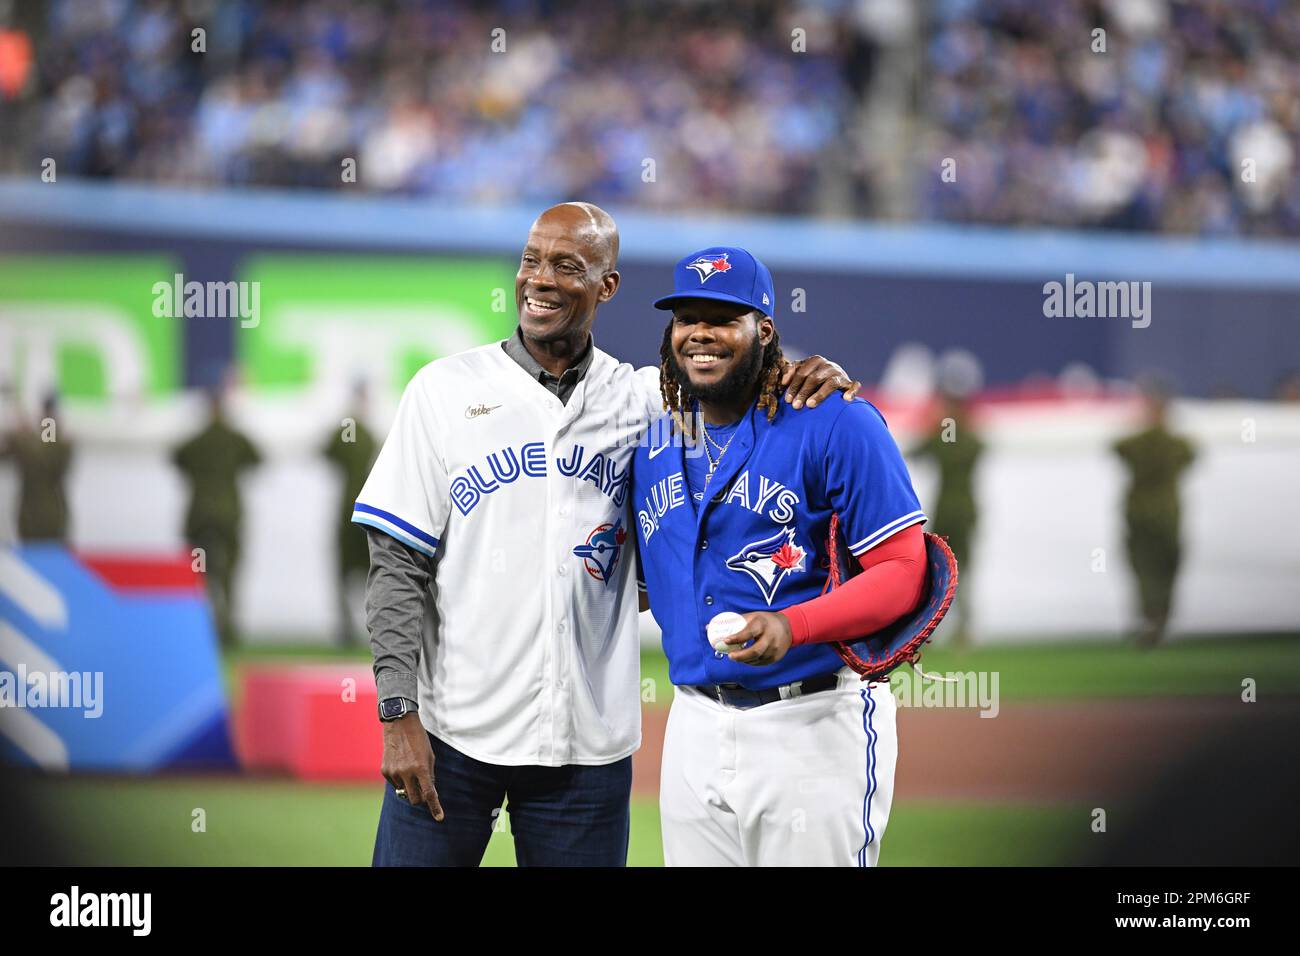 TORONTO, ON - APRIL 11: Toronto Blue Jays first baseman Vladimir Guerrero  Jr. (27) poses for the cameras after the opening ceremony pitch from Former Blue  Jays first baseman and recent Hall